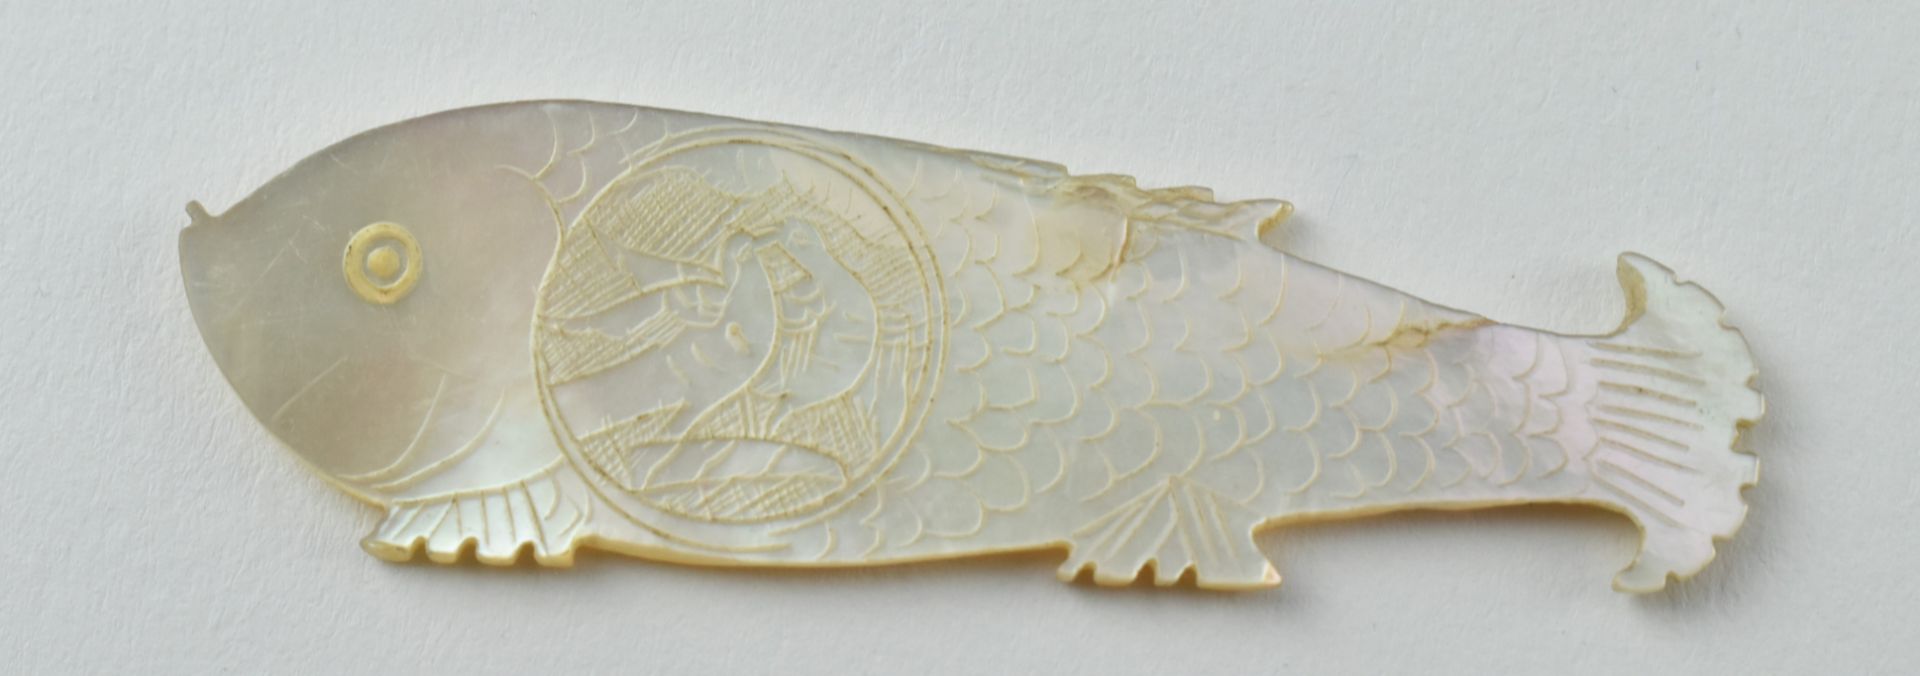 QING DYNASTY MOTHER OF PEARL GAMING TOKENS 清十三行贝母筹码 - Bild 10 aus 11